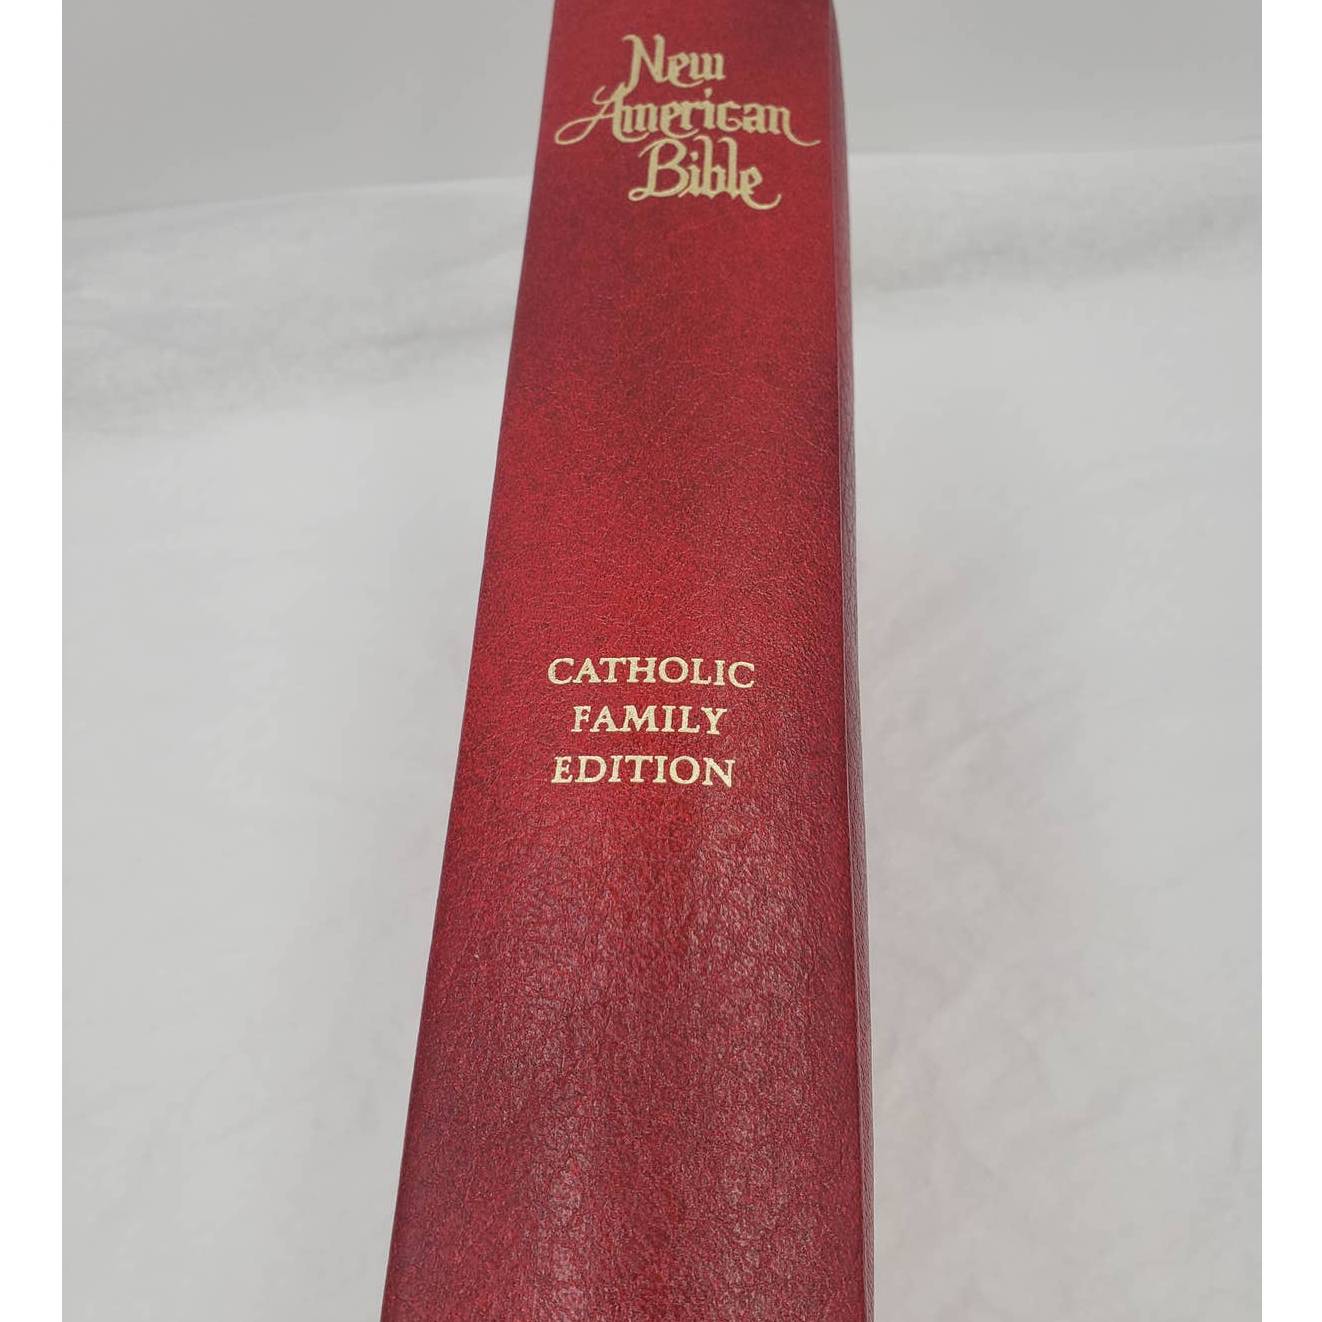 1970s The New American Bible Catholic Family Edition w/Words of Christ in Red